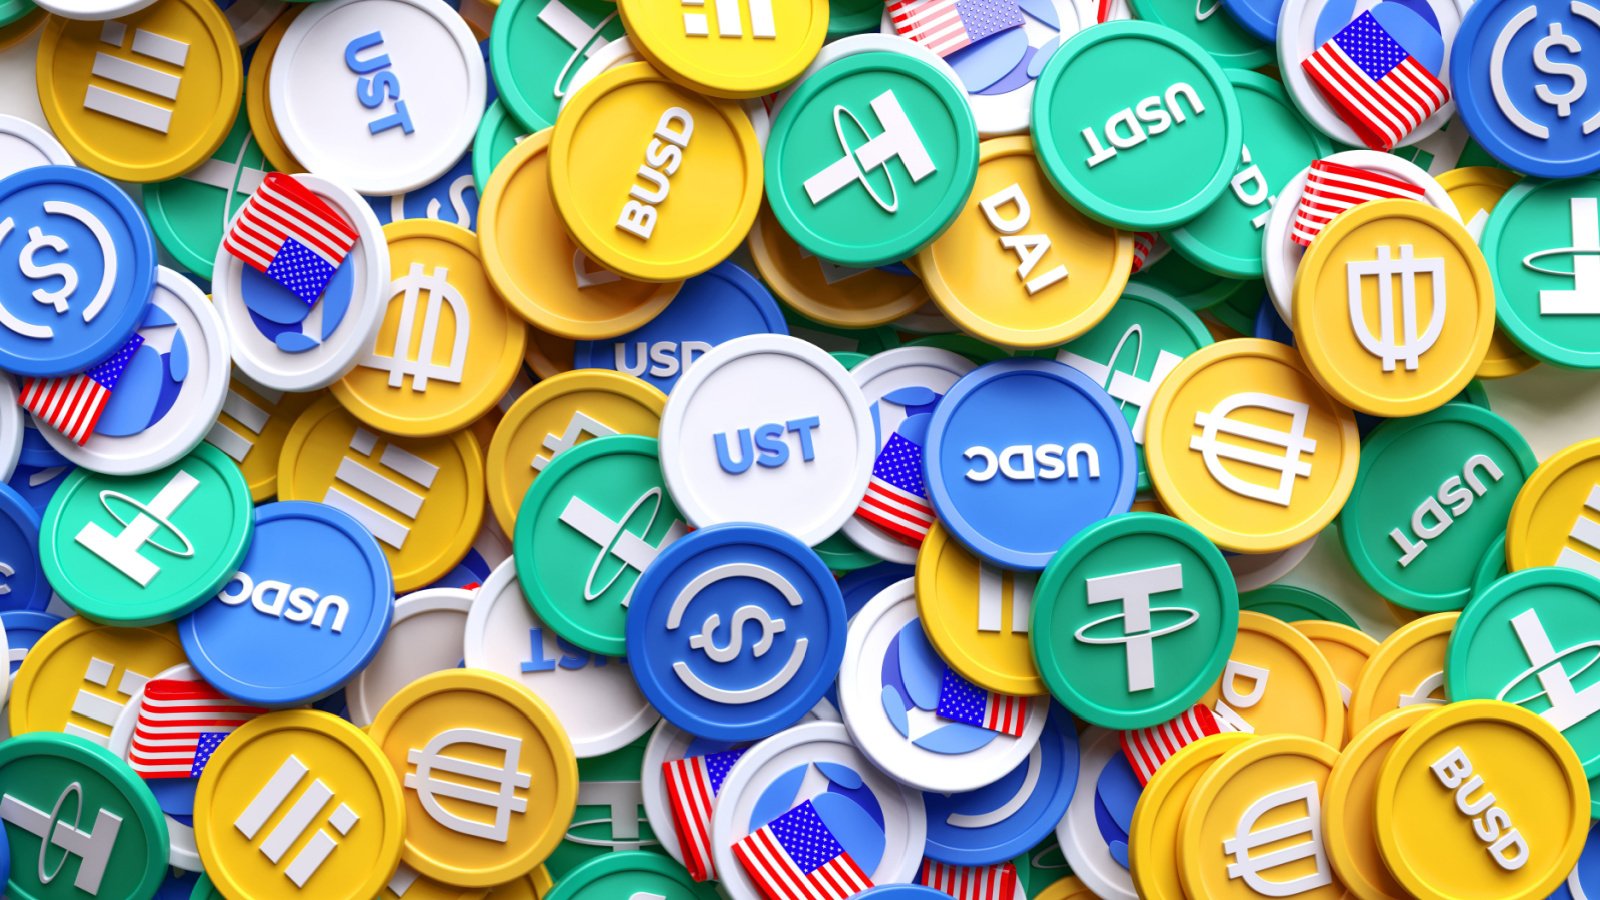 Stablecoins Aren’t Securities, Says Circle in SEC Lawsuits Against Binance